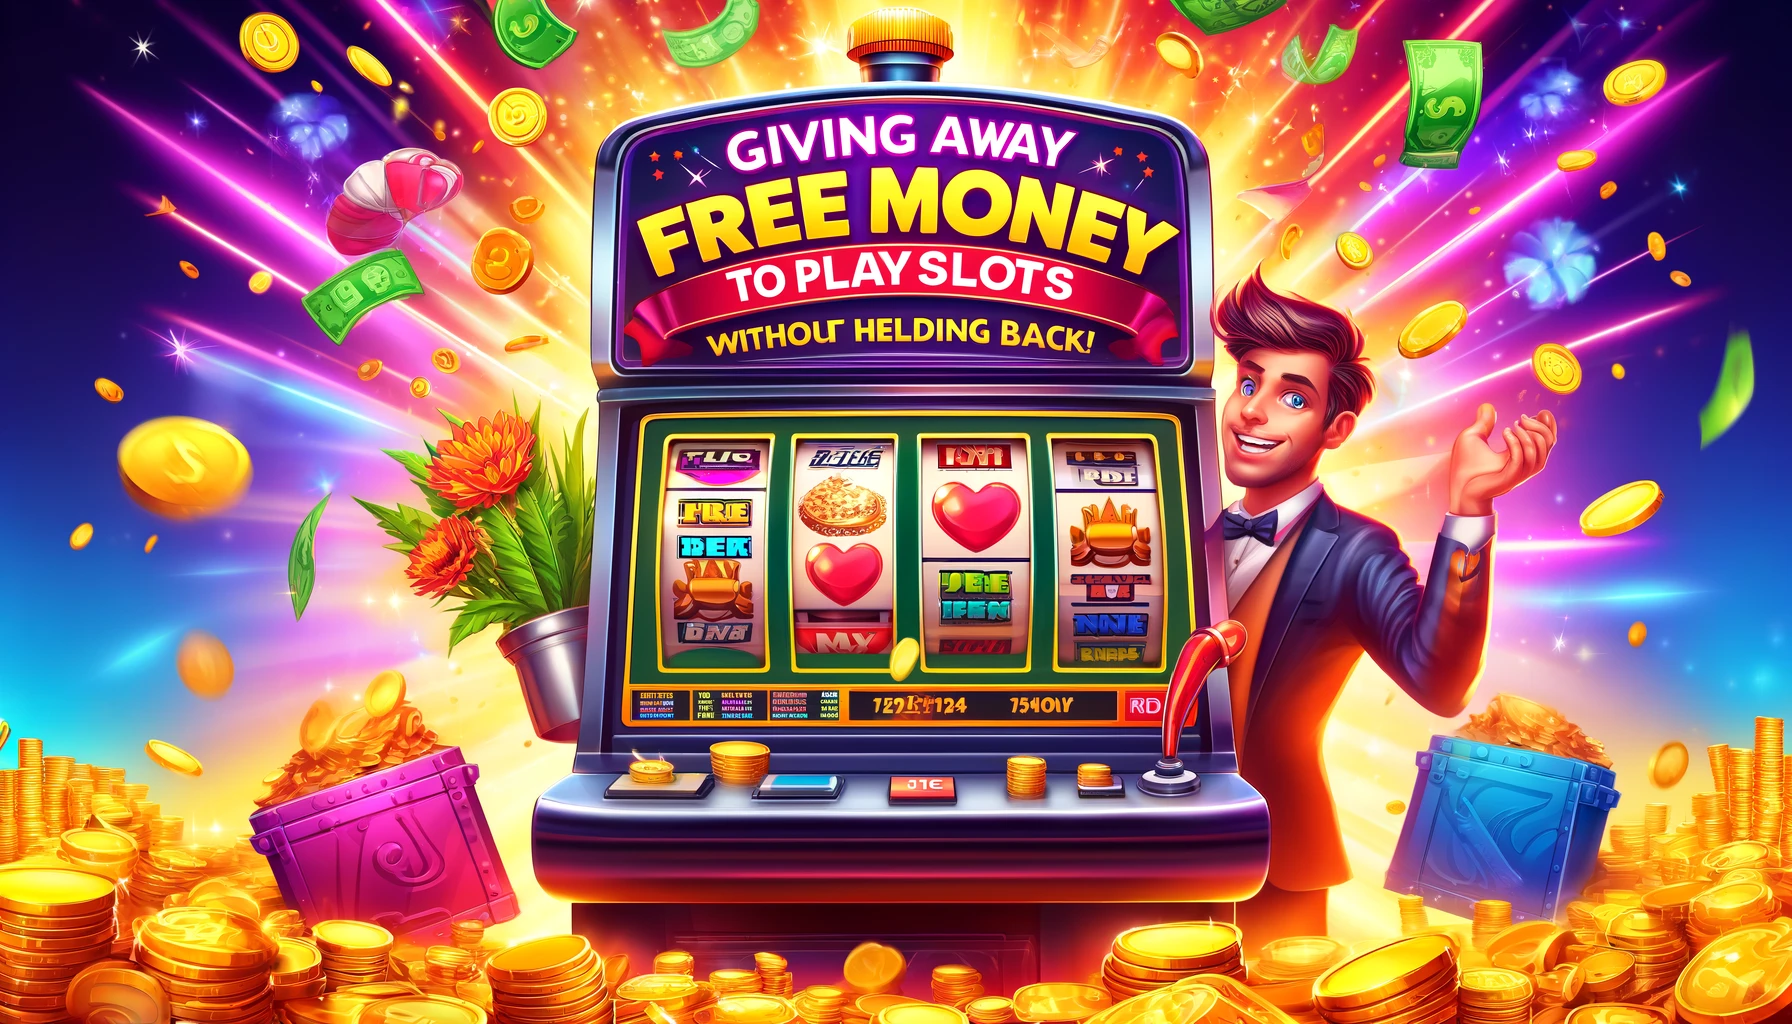 Giving away free money to play slots without holding back